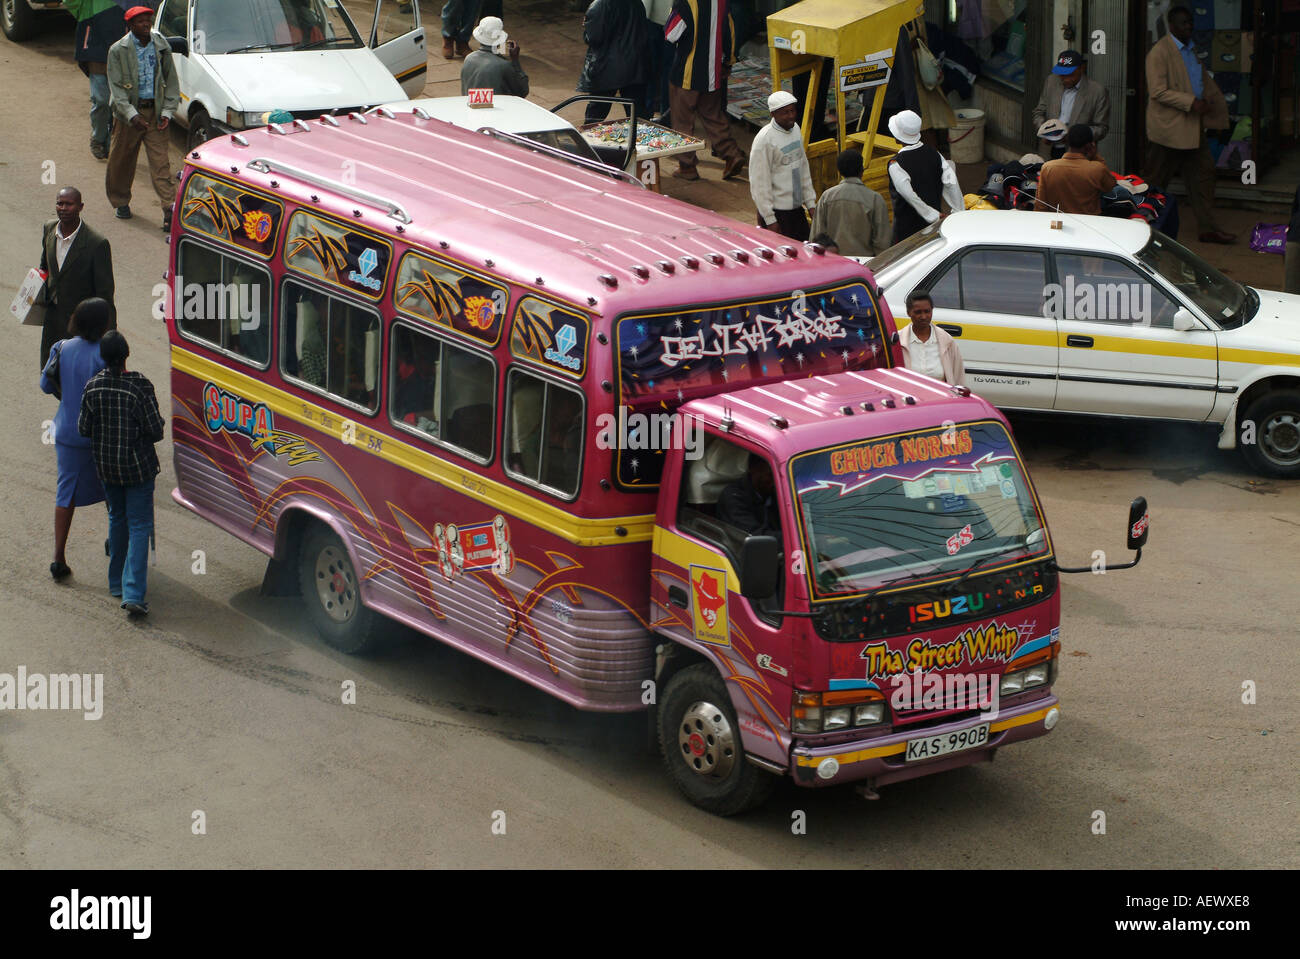 Coaches and buses all decorated differently. Nairobi, Kenya, Africa Stock Photo